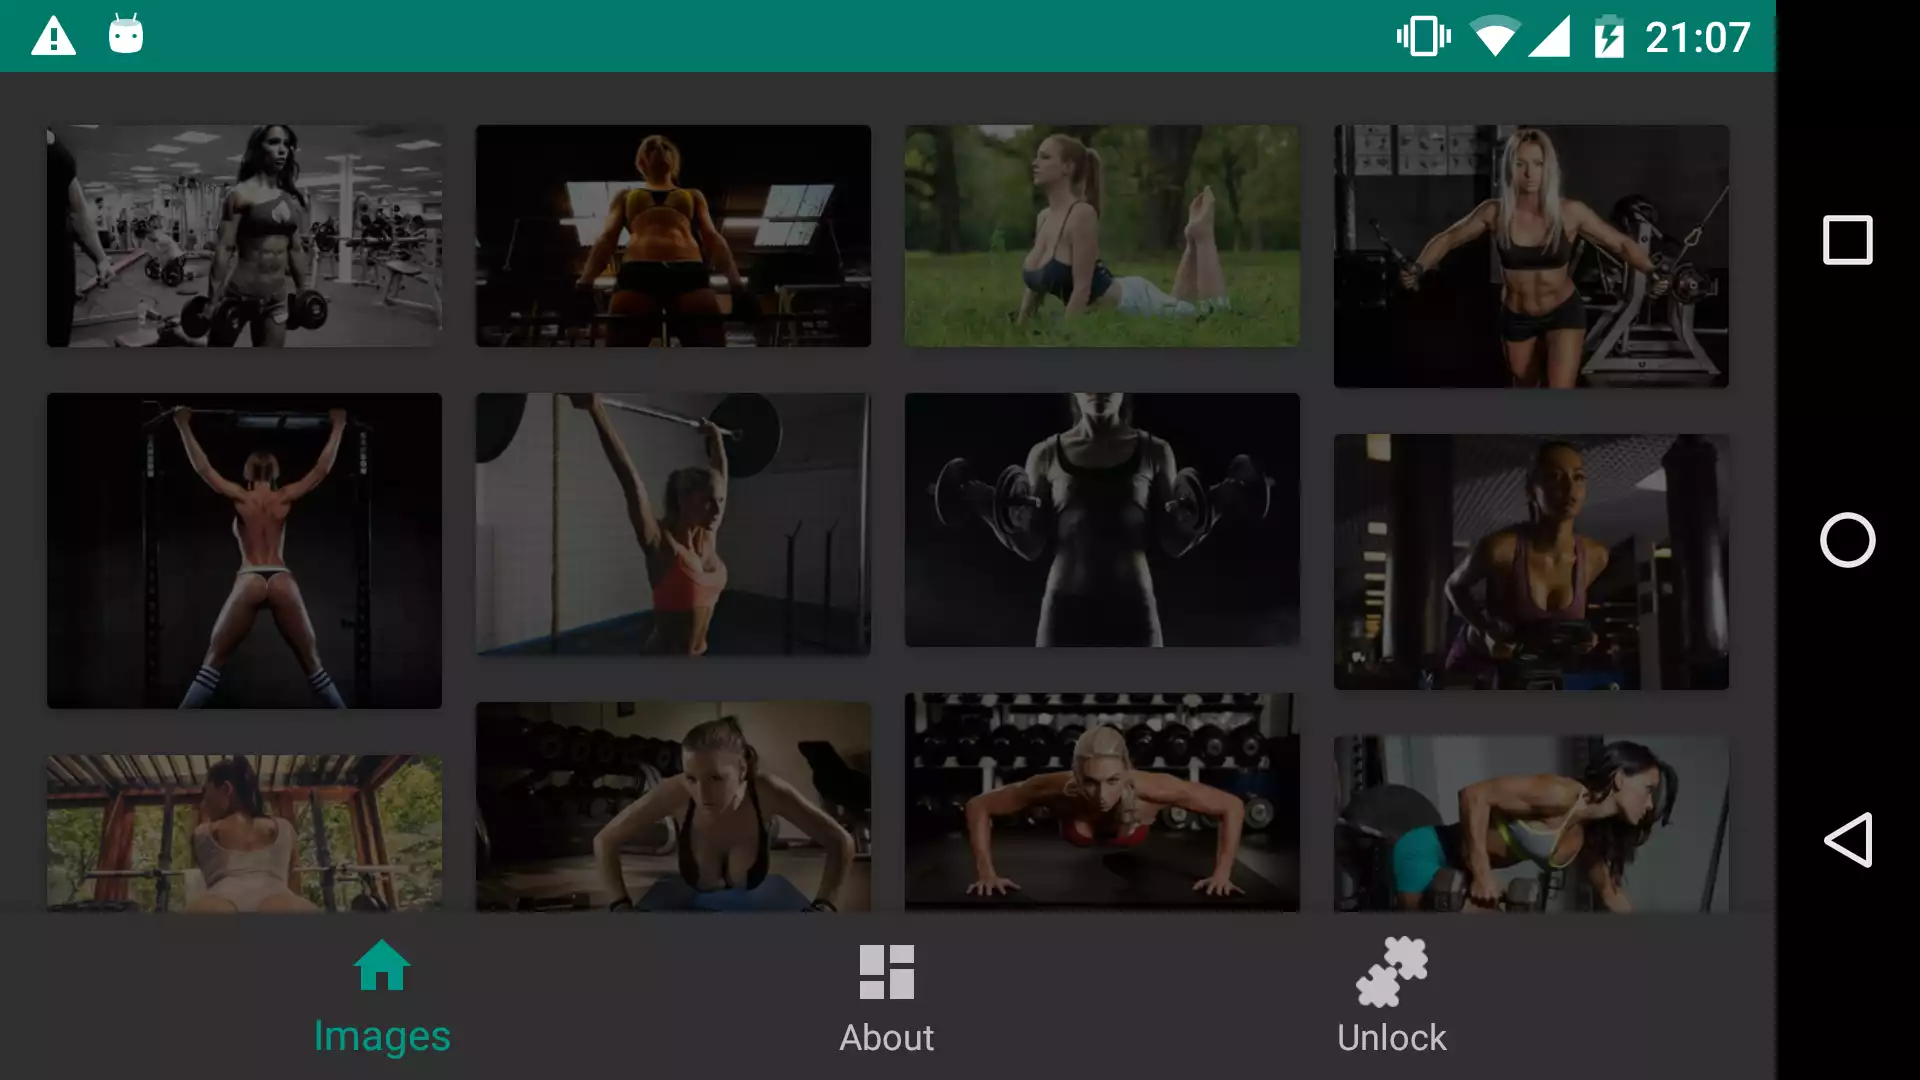 Muscle Girls apk,hot,futanari,hentie,hintai,hentay,jagger,puzzle,best,hentai,pictures,mobile,android,pics,download,sexy,images,apps,josie,for,app,porn,games,galleries